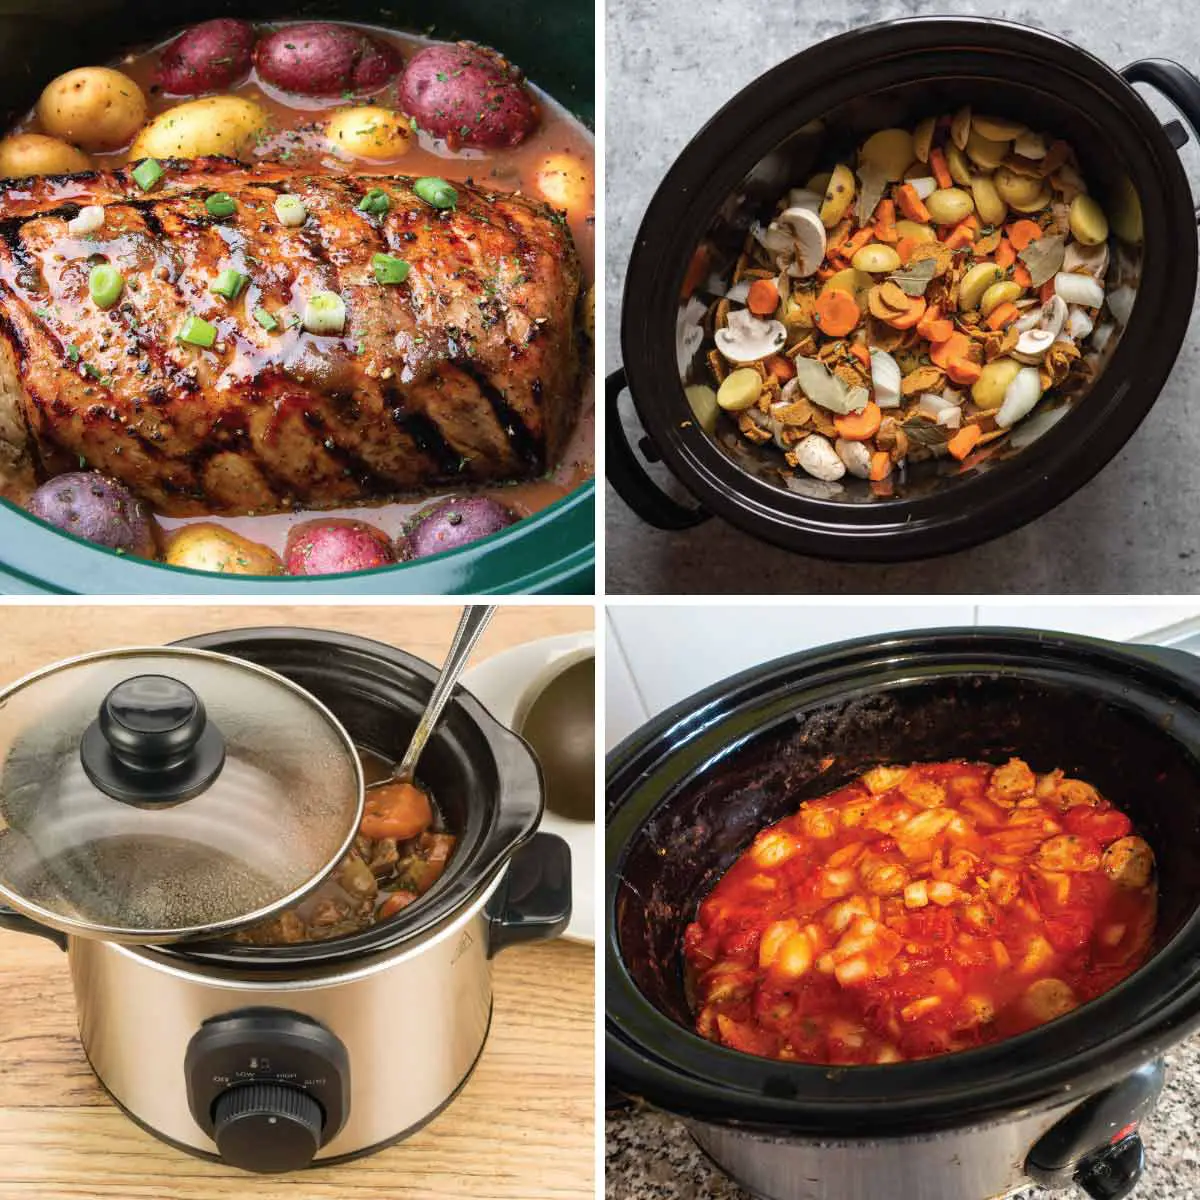 4 different slow cookers with food in them to show they come in different sizes.